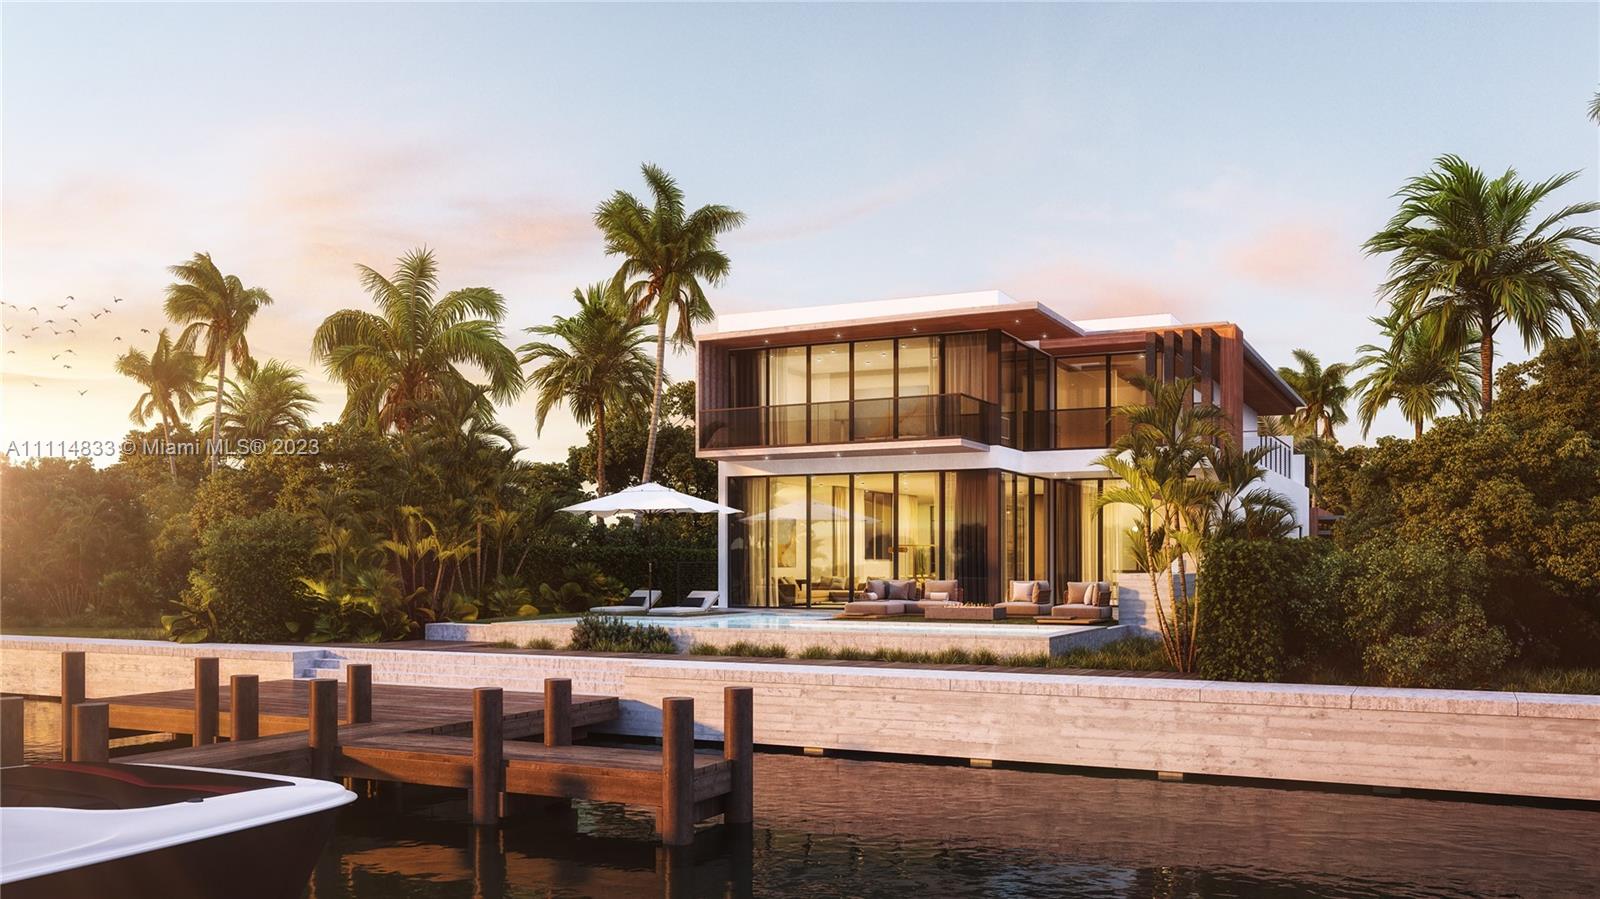 A rare Bayfront Development opportunity in the waterfront oasis of Normandy Isles.  This exclusive Golf-course gated community has become one of the most desirable locations for waterfront luxury living in Miami Beach.  Centrally located, and minutes away from Bal Harbor, Miami Design District, Wynwood Art District, South Beach, and a short distance to all major airports.  Build your waterfront dream home on this 10,200 sf waterfront lot with 60 feet of water frontage.  Or take advantage of the existing “ready-to-go” plans for a new exquisite 5,100 sf home featuring 5 bedrooms, 5 baths, 2 powder rooms, two-car garage, family room, TV room, elevator, a spacious kitchen pantry, and a waterfront summer kitchen.  The plans also include a new dock that can accommodate a generously large boat.